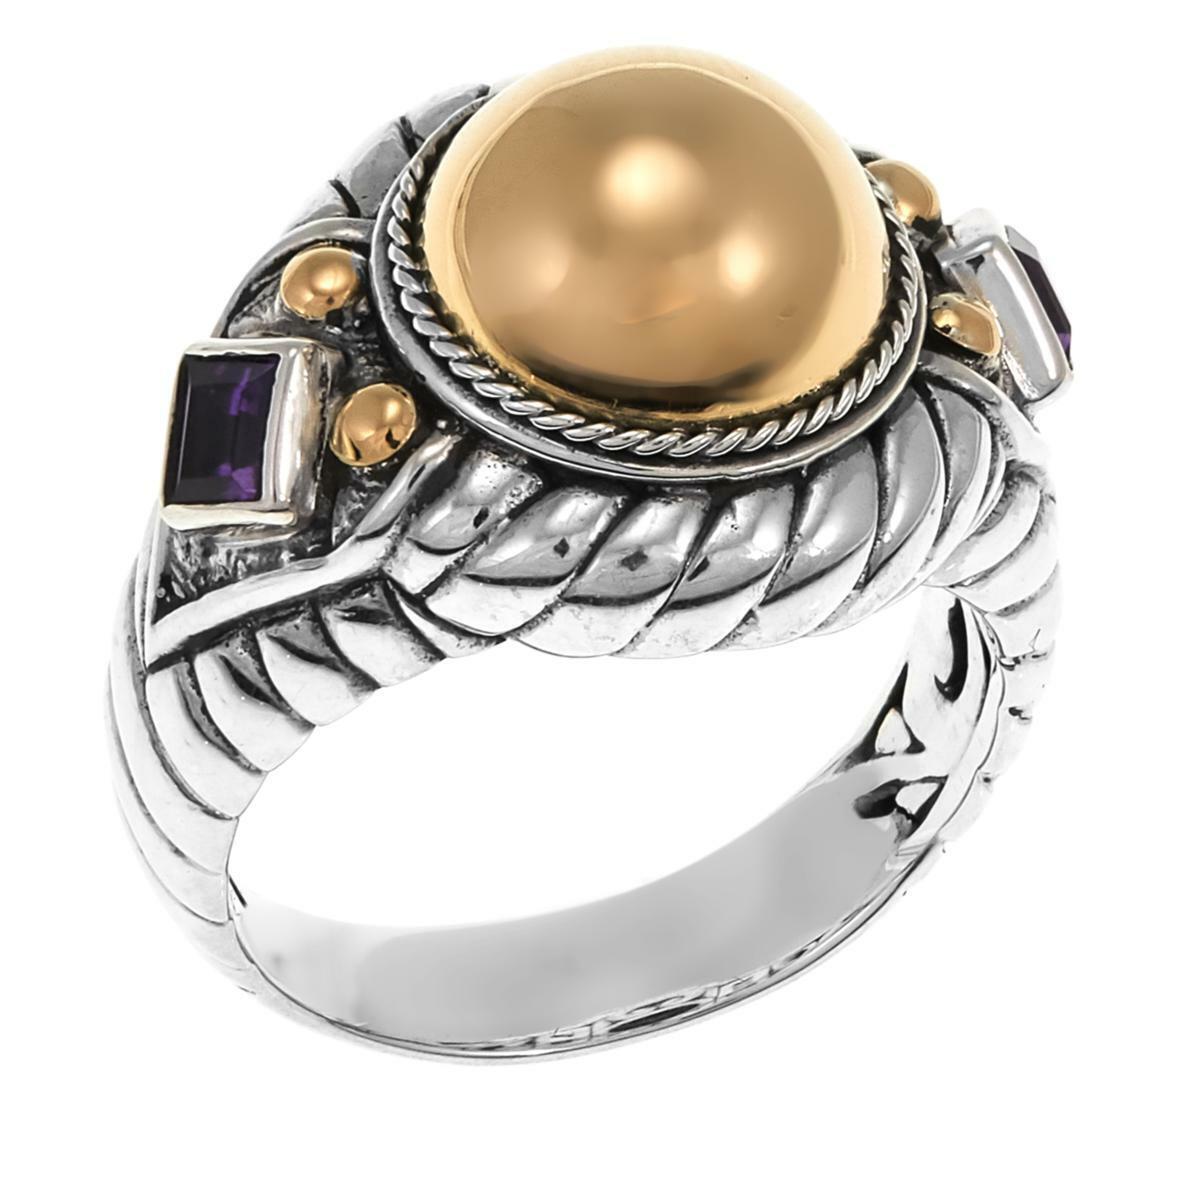 Bali Designs 2-Tone 0.22Ctw Amethyst Cable-Twist Ring Size 9 Hsn $221